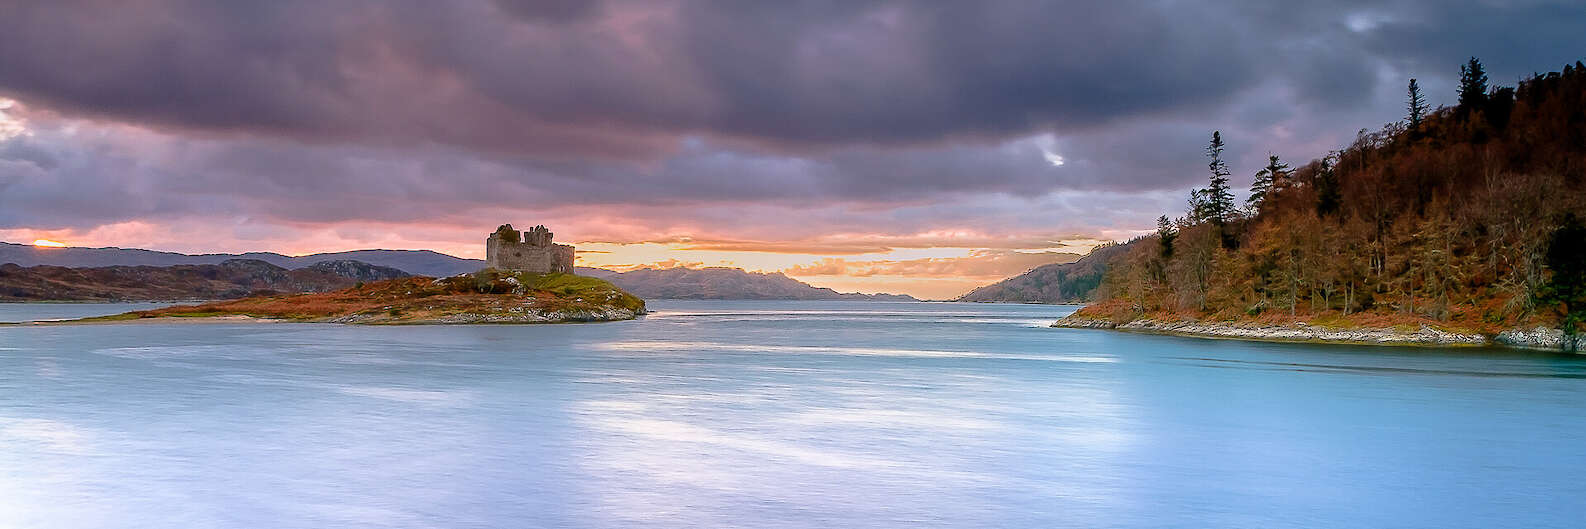 Castle Tioram | Courtesy of Steven Marshall Photography - www.smarshall-photography.com